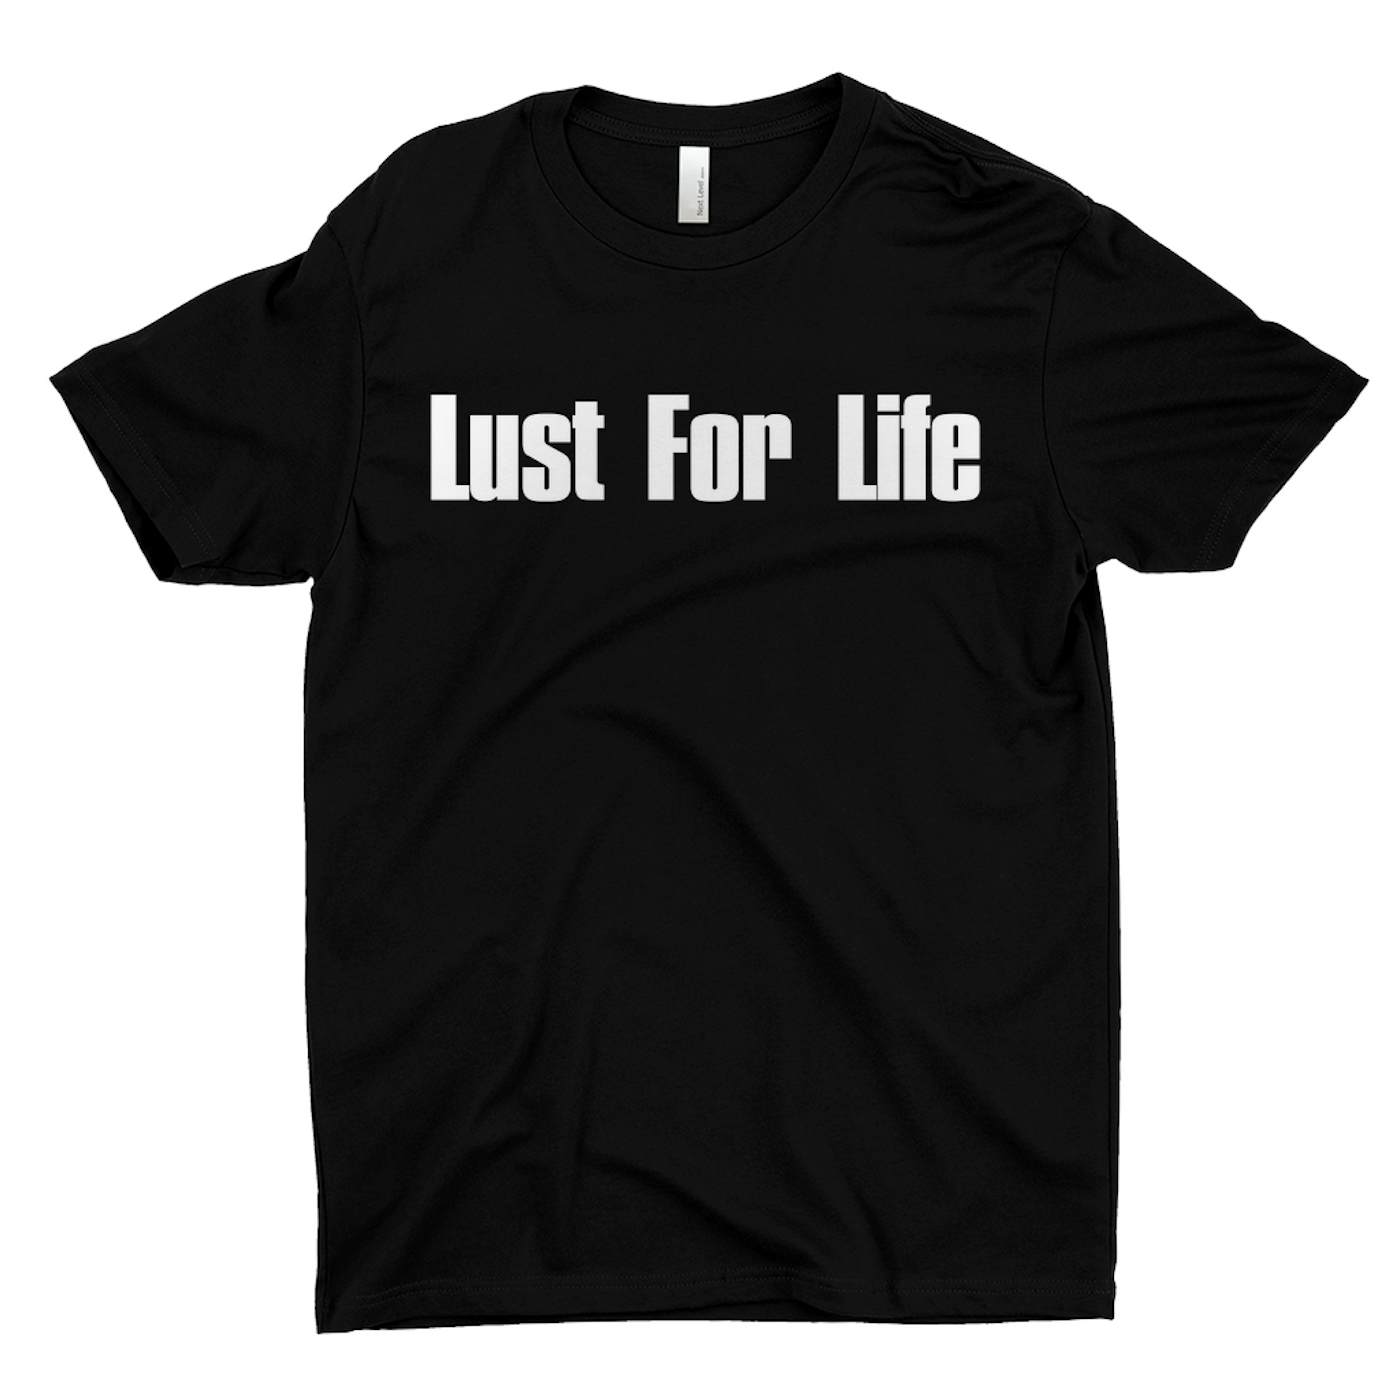 The Stooges T-Shirt | Lust For Life Worn By Iggy Pop The Stooges Shirt